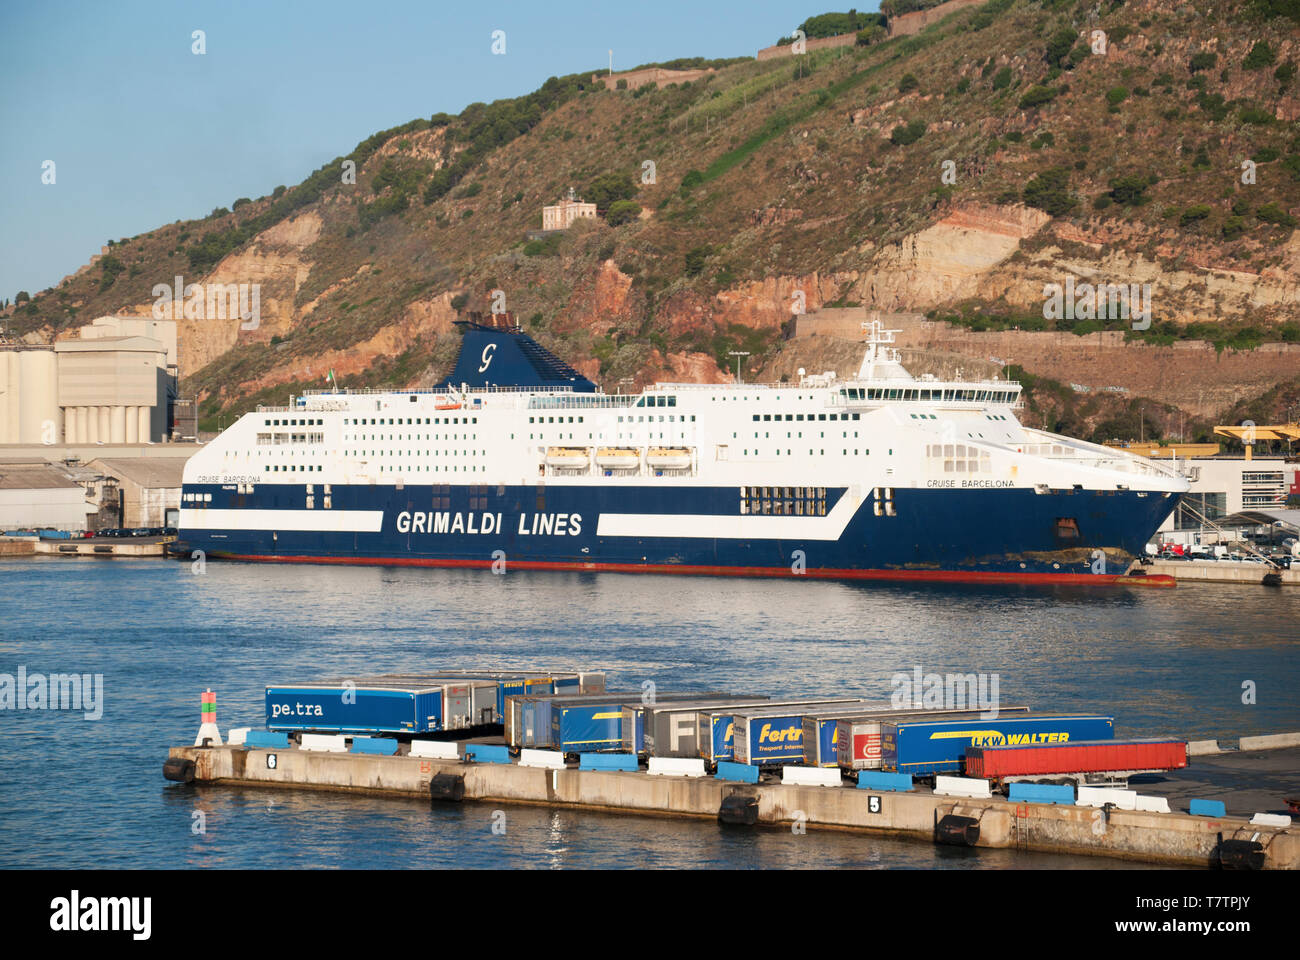 Ferry Cruise Barcelona of the Grimaldi Lines company docked at the port of Barcelona. Stock Photo